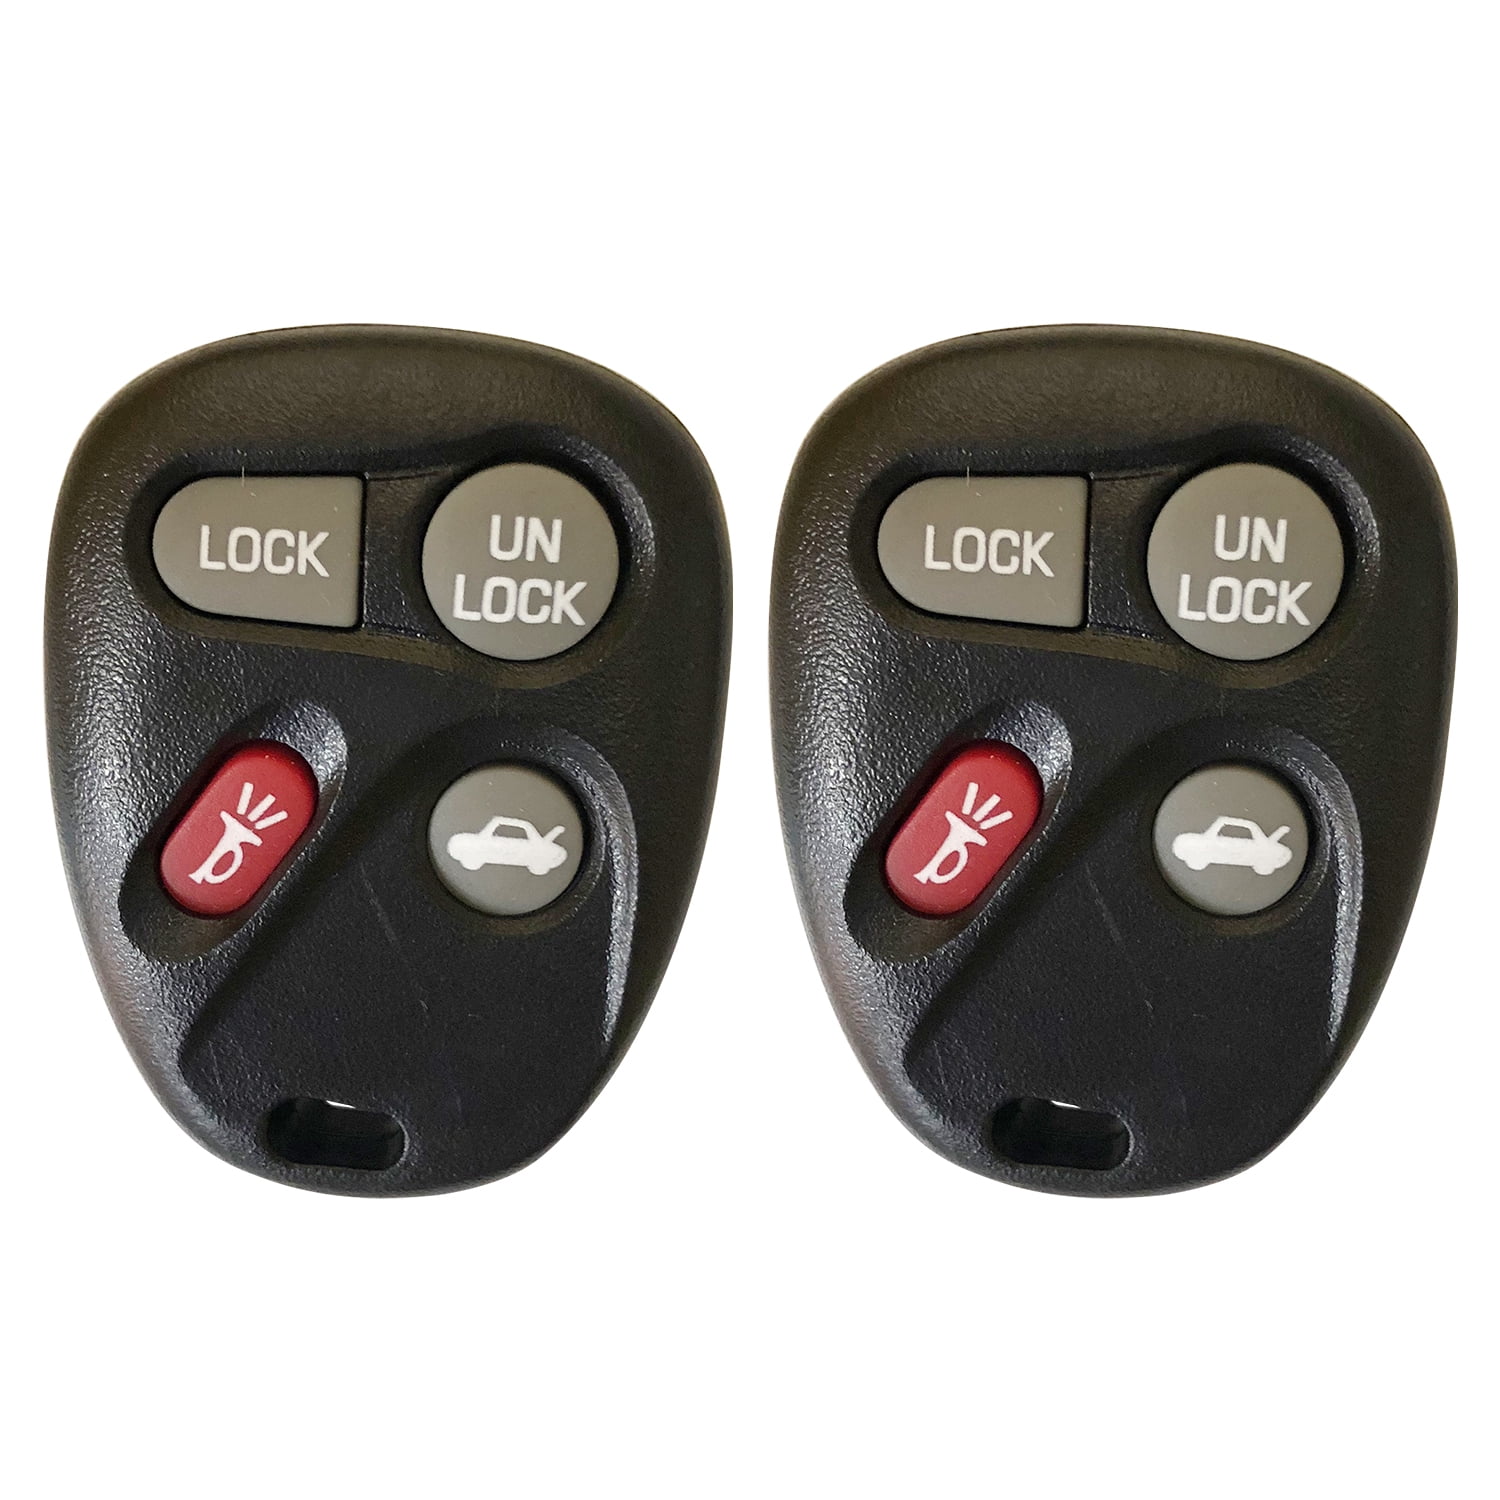 2x OEM Replacement Keyless Remote Key Fob For Buick Chevy Pontiac ABO1502T